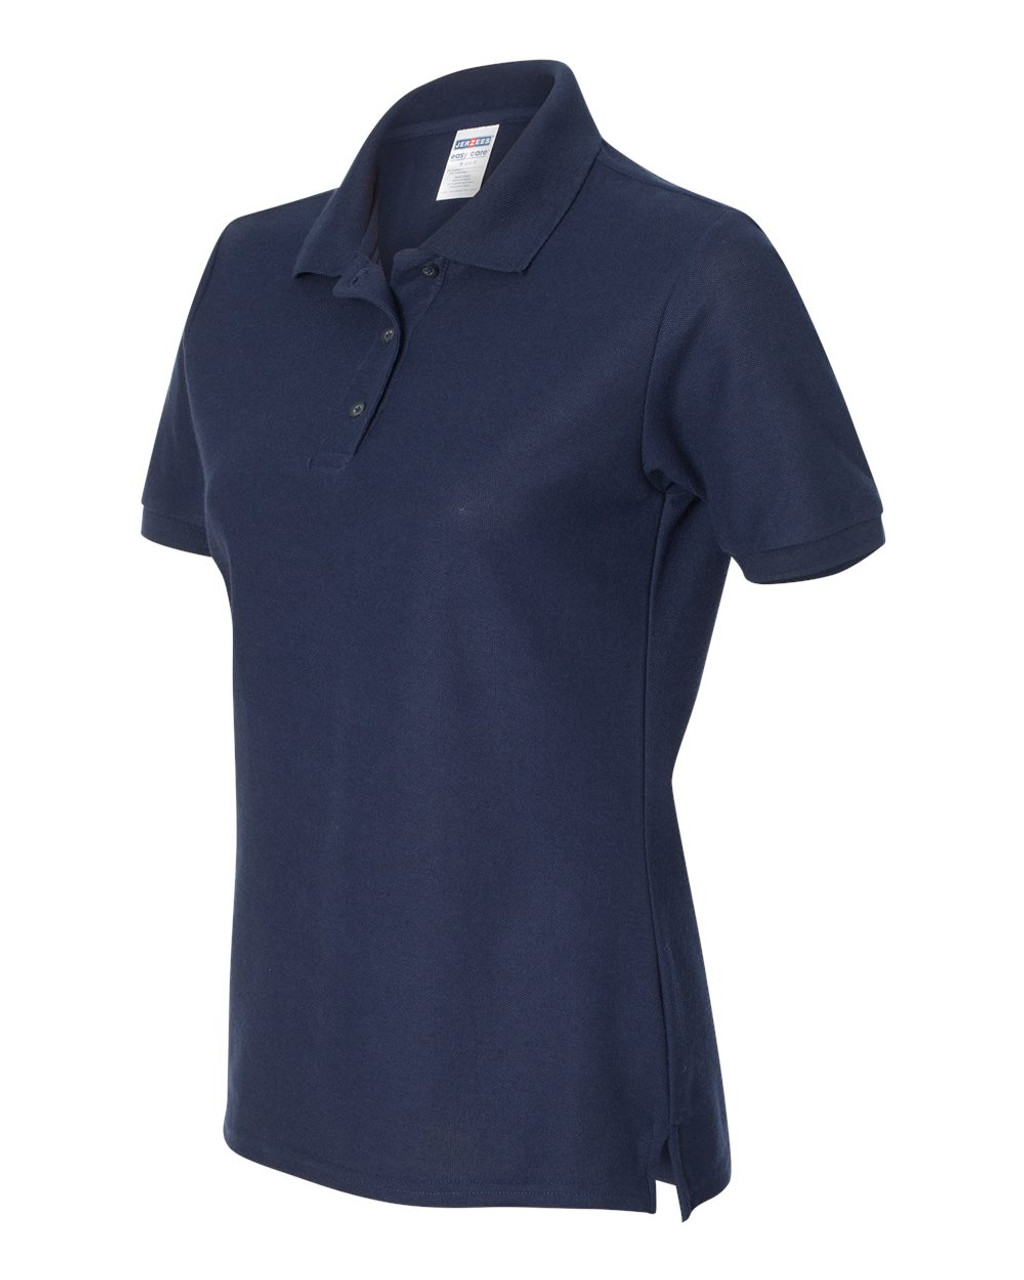 Embroidered Women's Easy Care Piqué Polo - 537WR